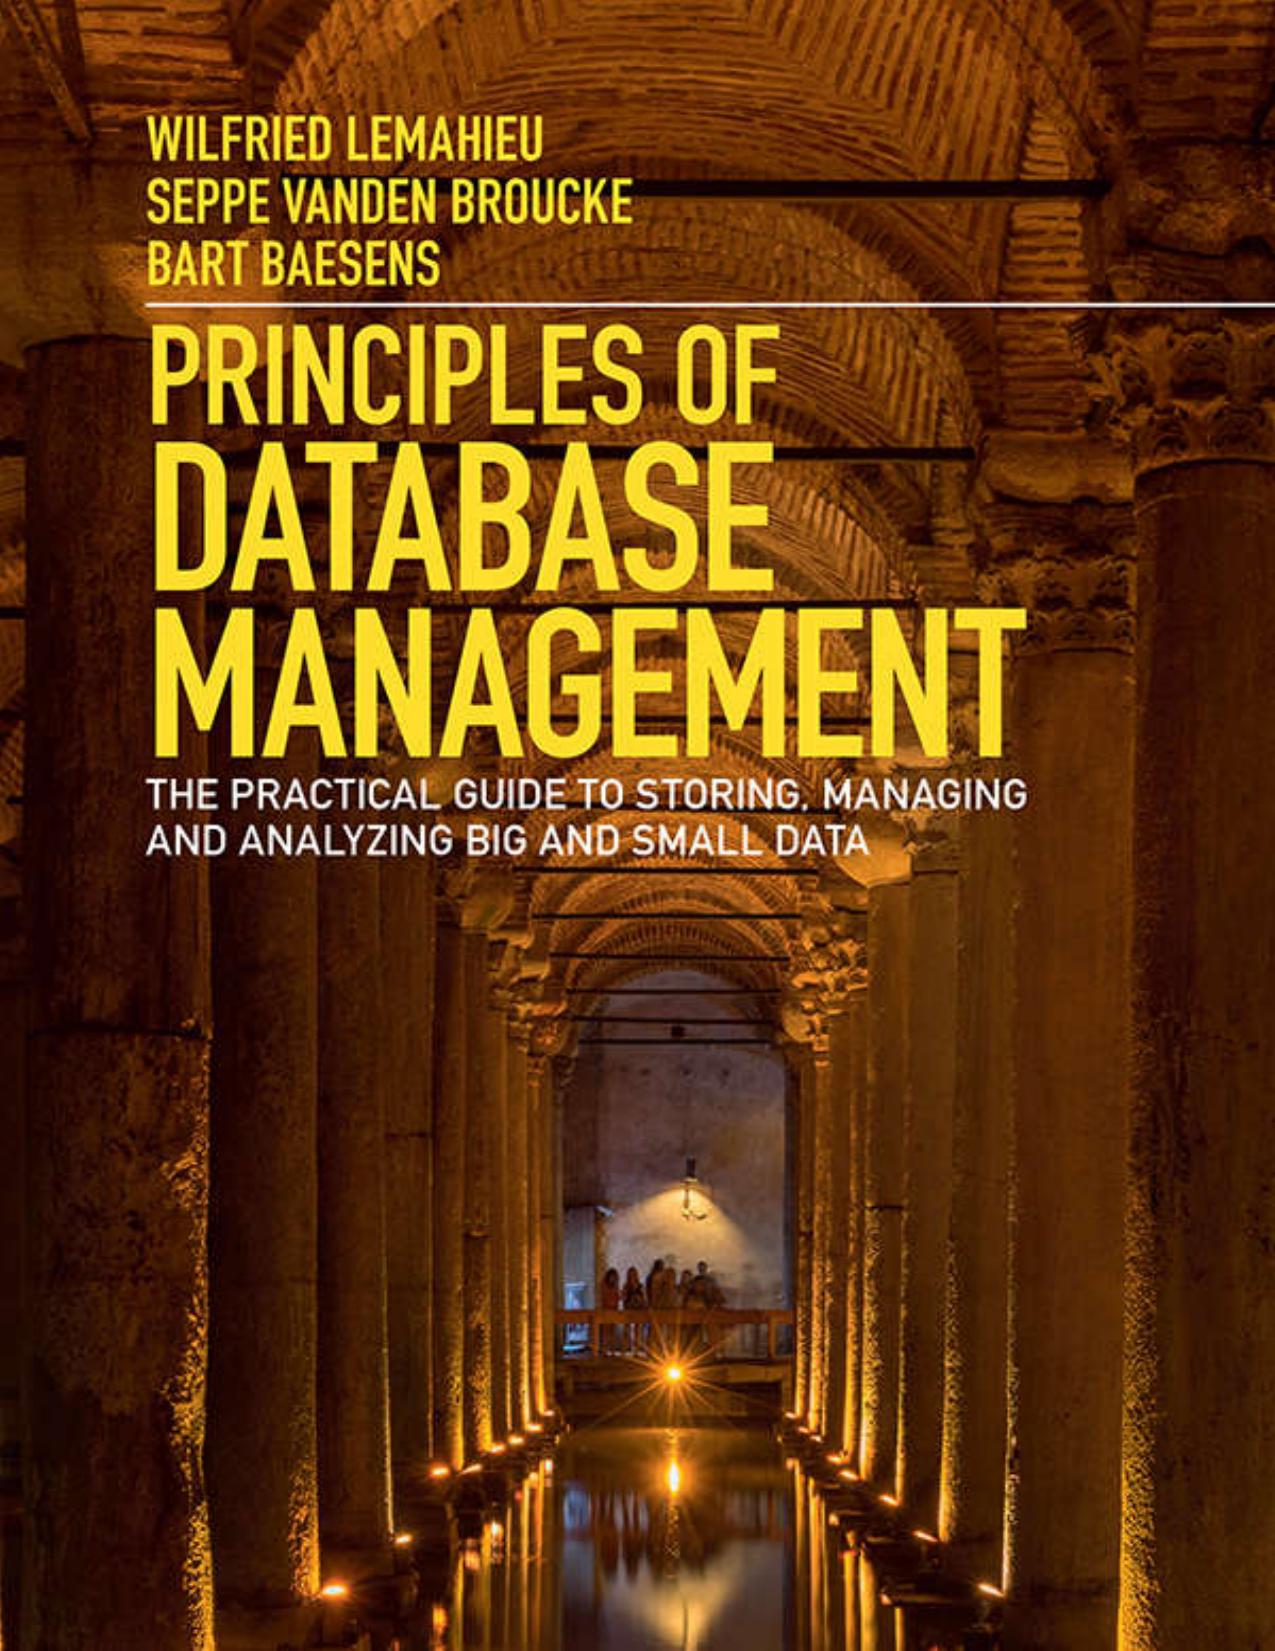 Principles of Database Management: The Practical Guide to Storing, Managing and Analyzing Big and Small Data 1st Editiona - by  Wilfried Lemahieu , Seppe vanden Broucke , Bart Baesens